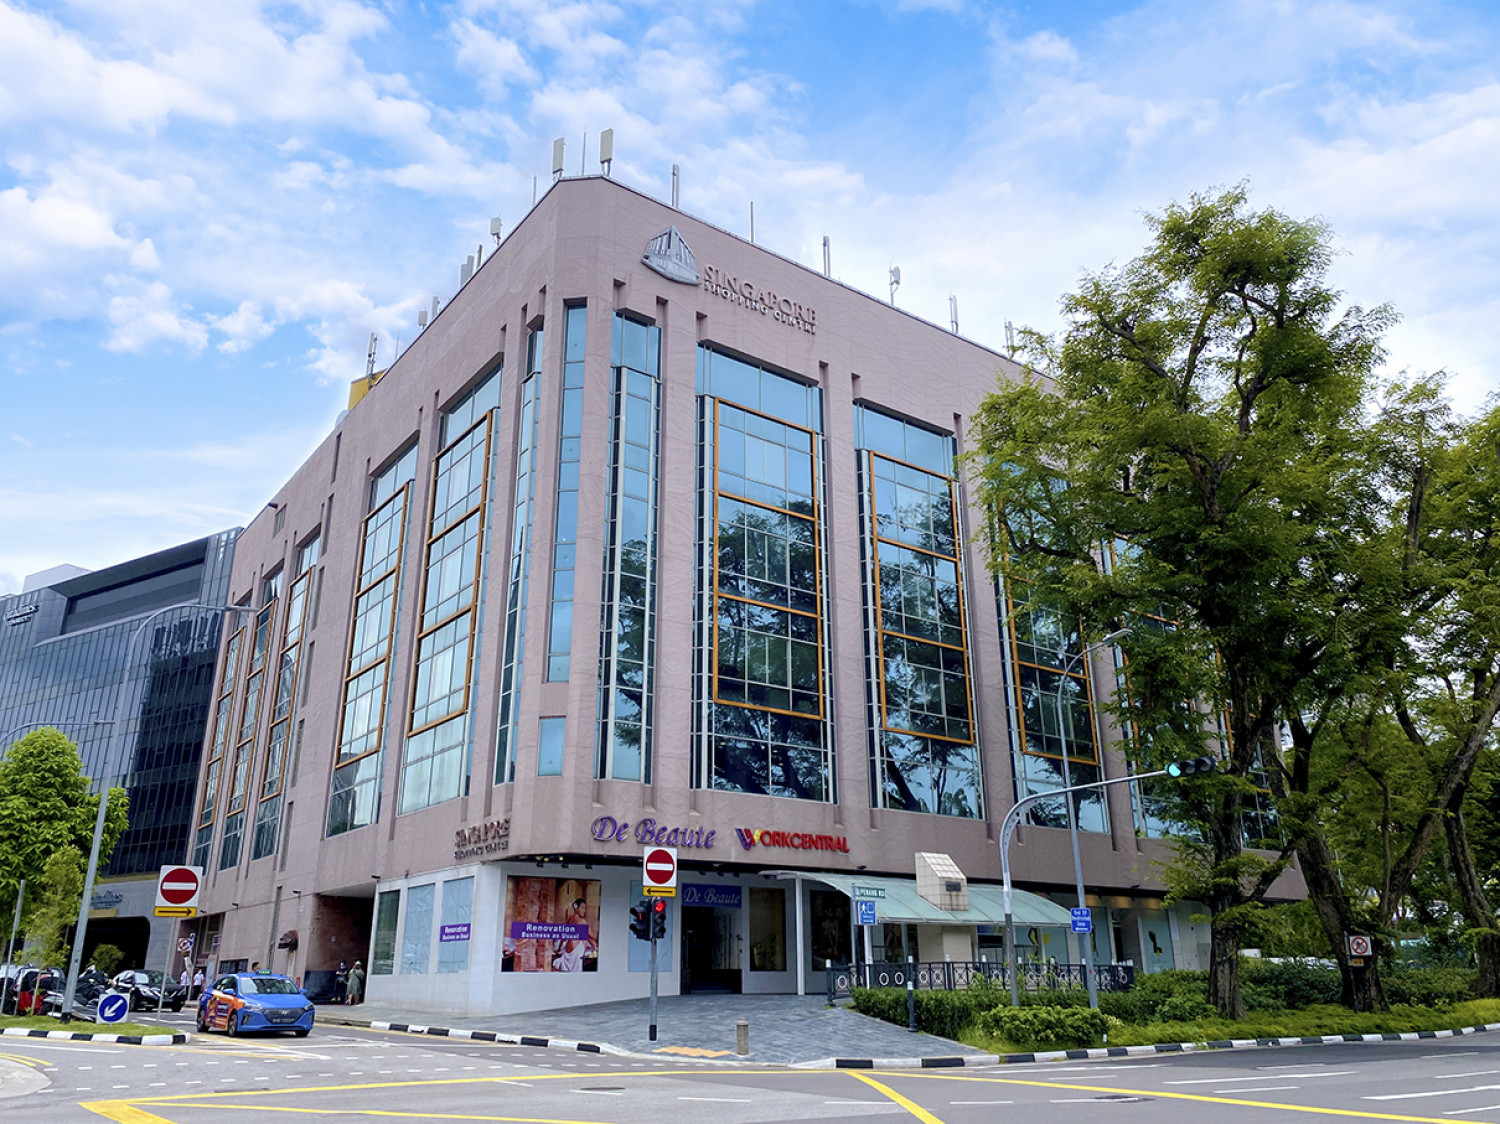 Portfolio of strata commercial units at Singapore Shopping Centre for sale at $40 mil - Property News